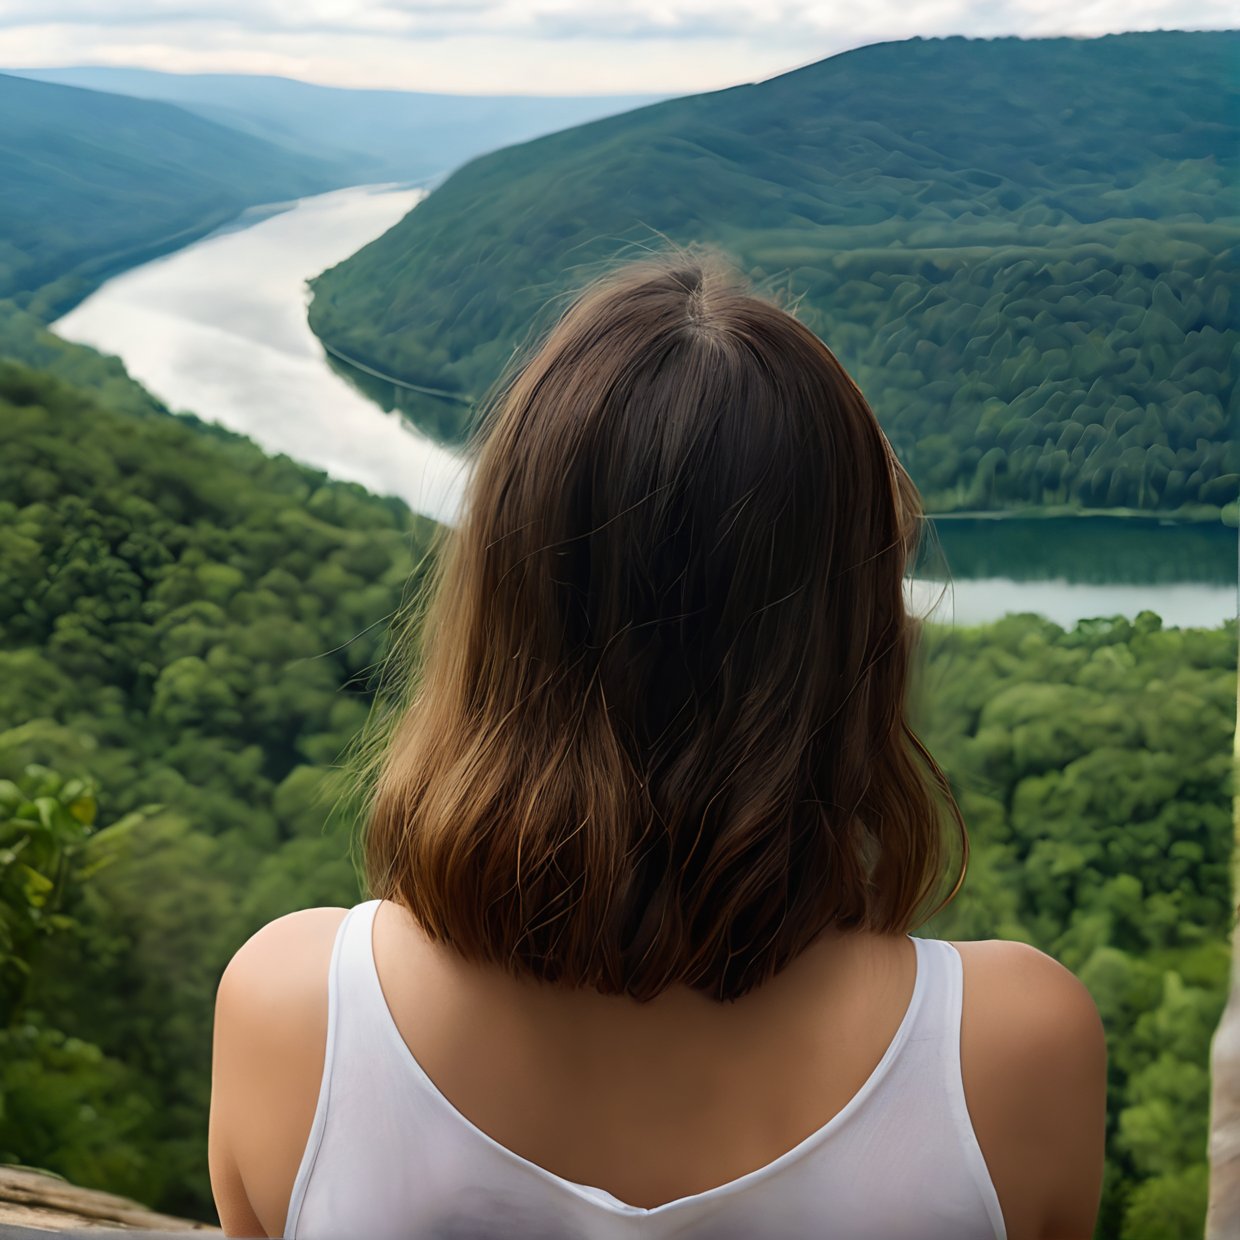 High Resolution, Masterpiece, High Quality, High Definition, Focus on Face of One Young Woman, Human Figure, Overlooking Large Forest from Back, Mountain Landscape, Forest, Nature, River,realistic